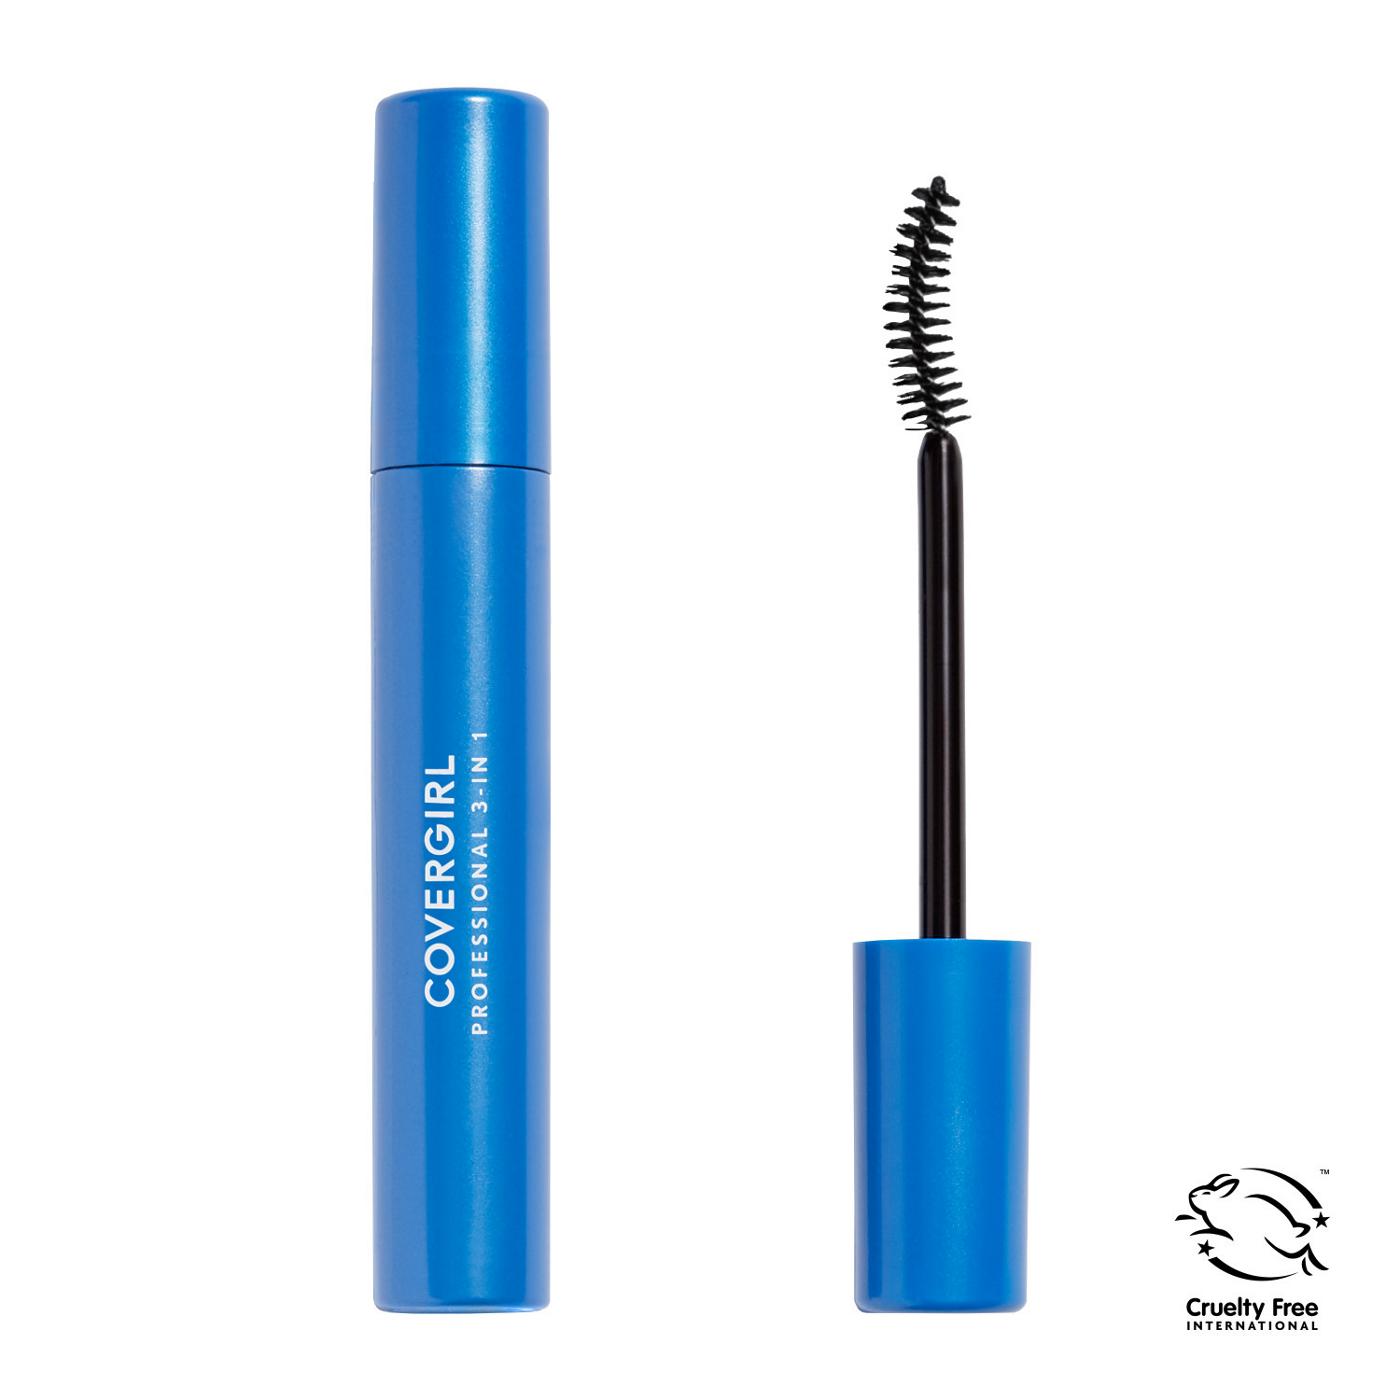 Covergirl Professional 3-in-1 Curved Brush Mascara 205 Black; image 2 of 4